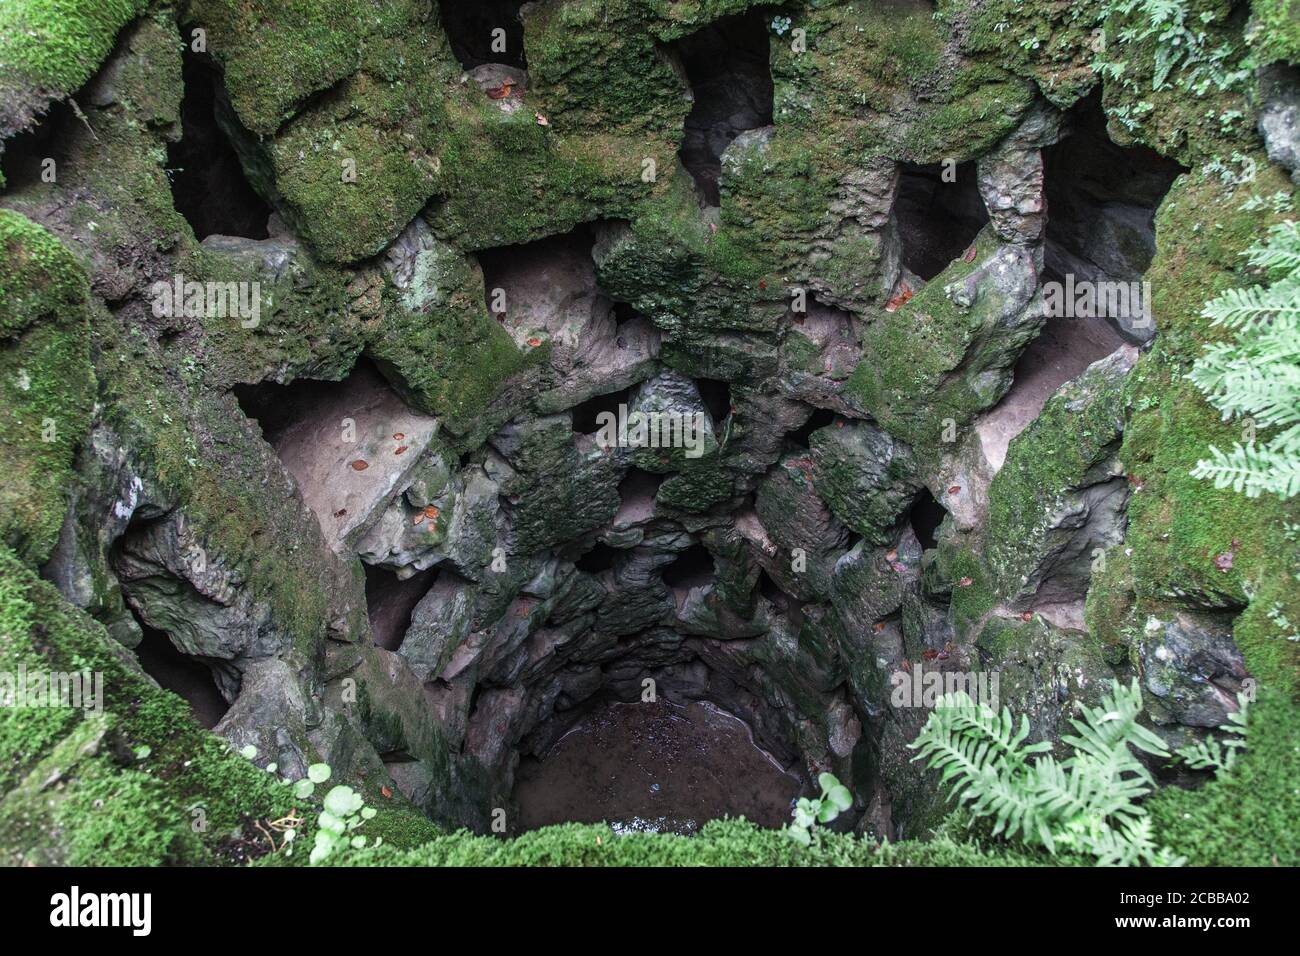 Unfinished Initiation Well at Quinta da Regaleira, Sintra, Portugal. Stock Photo